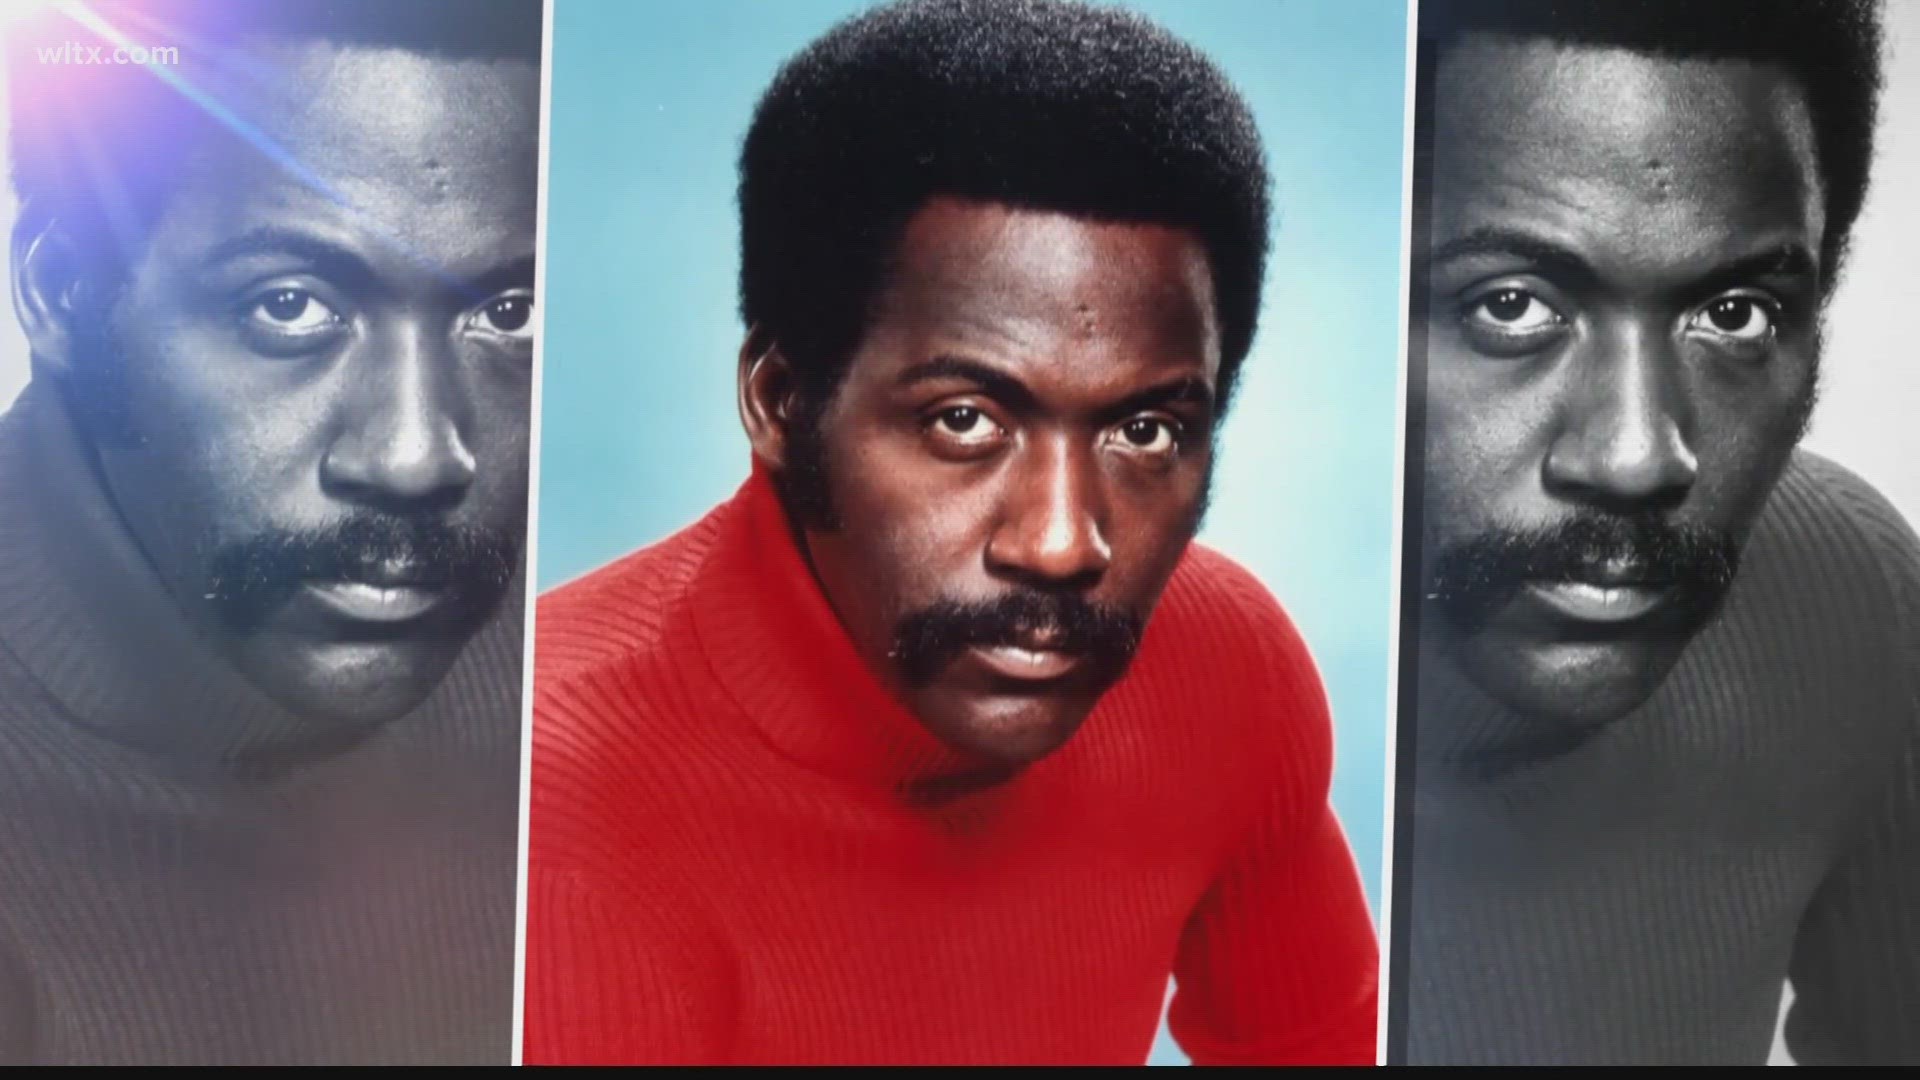 He is best know as "Shaft" but was in countless TV and movies.